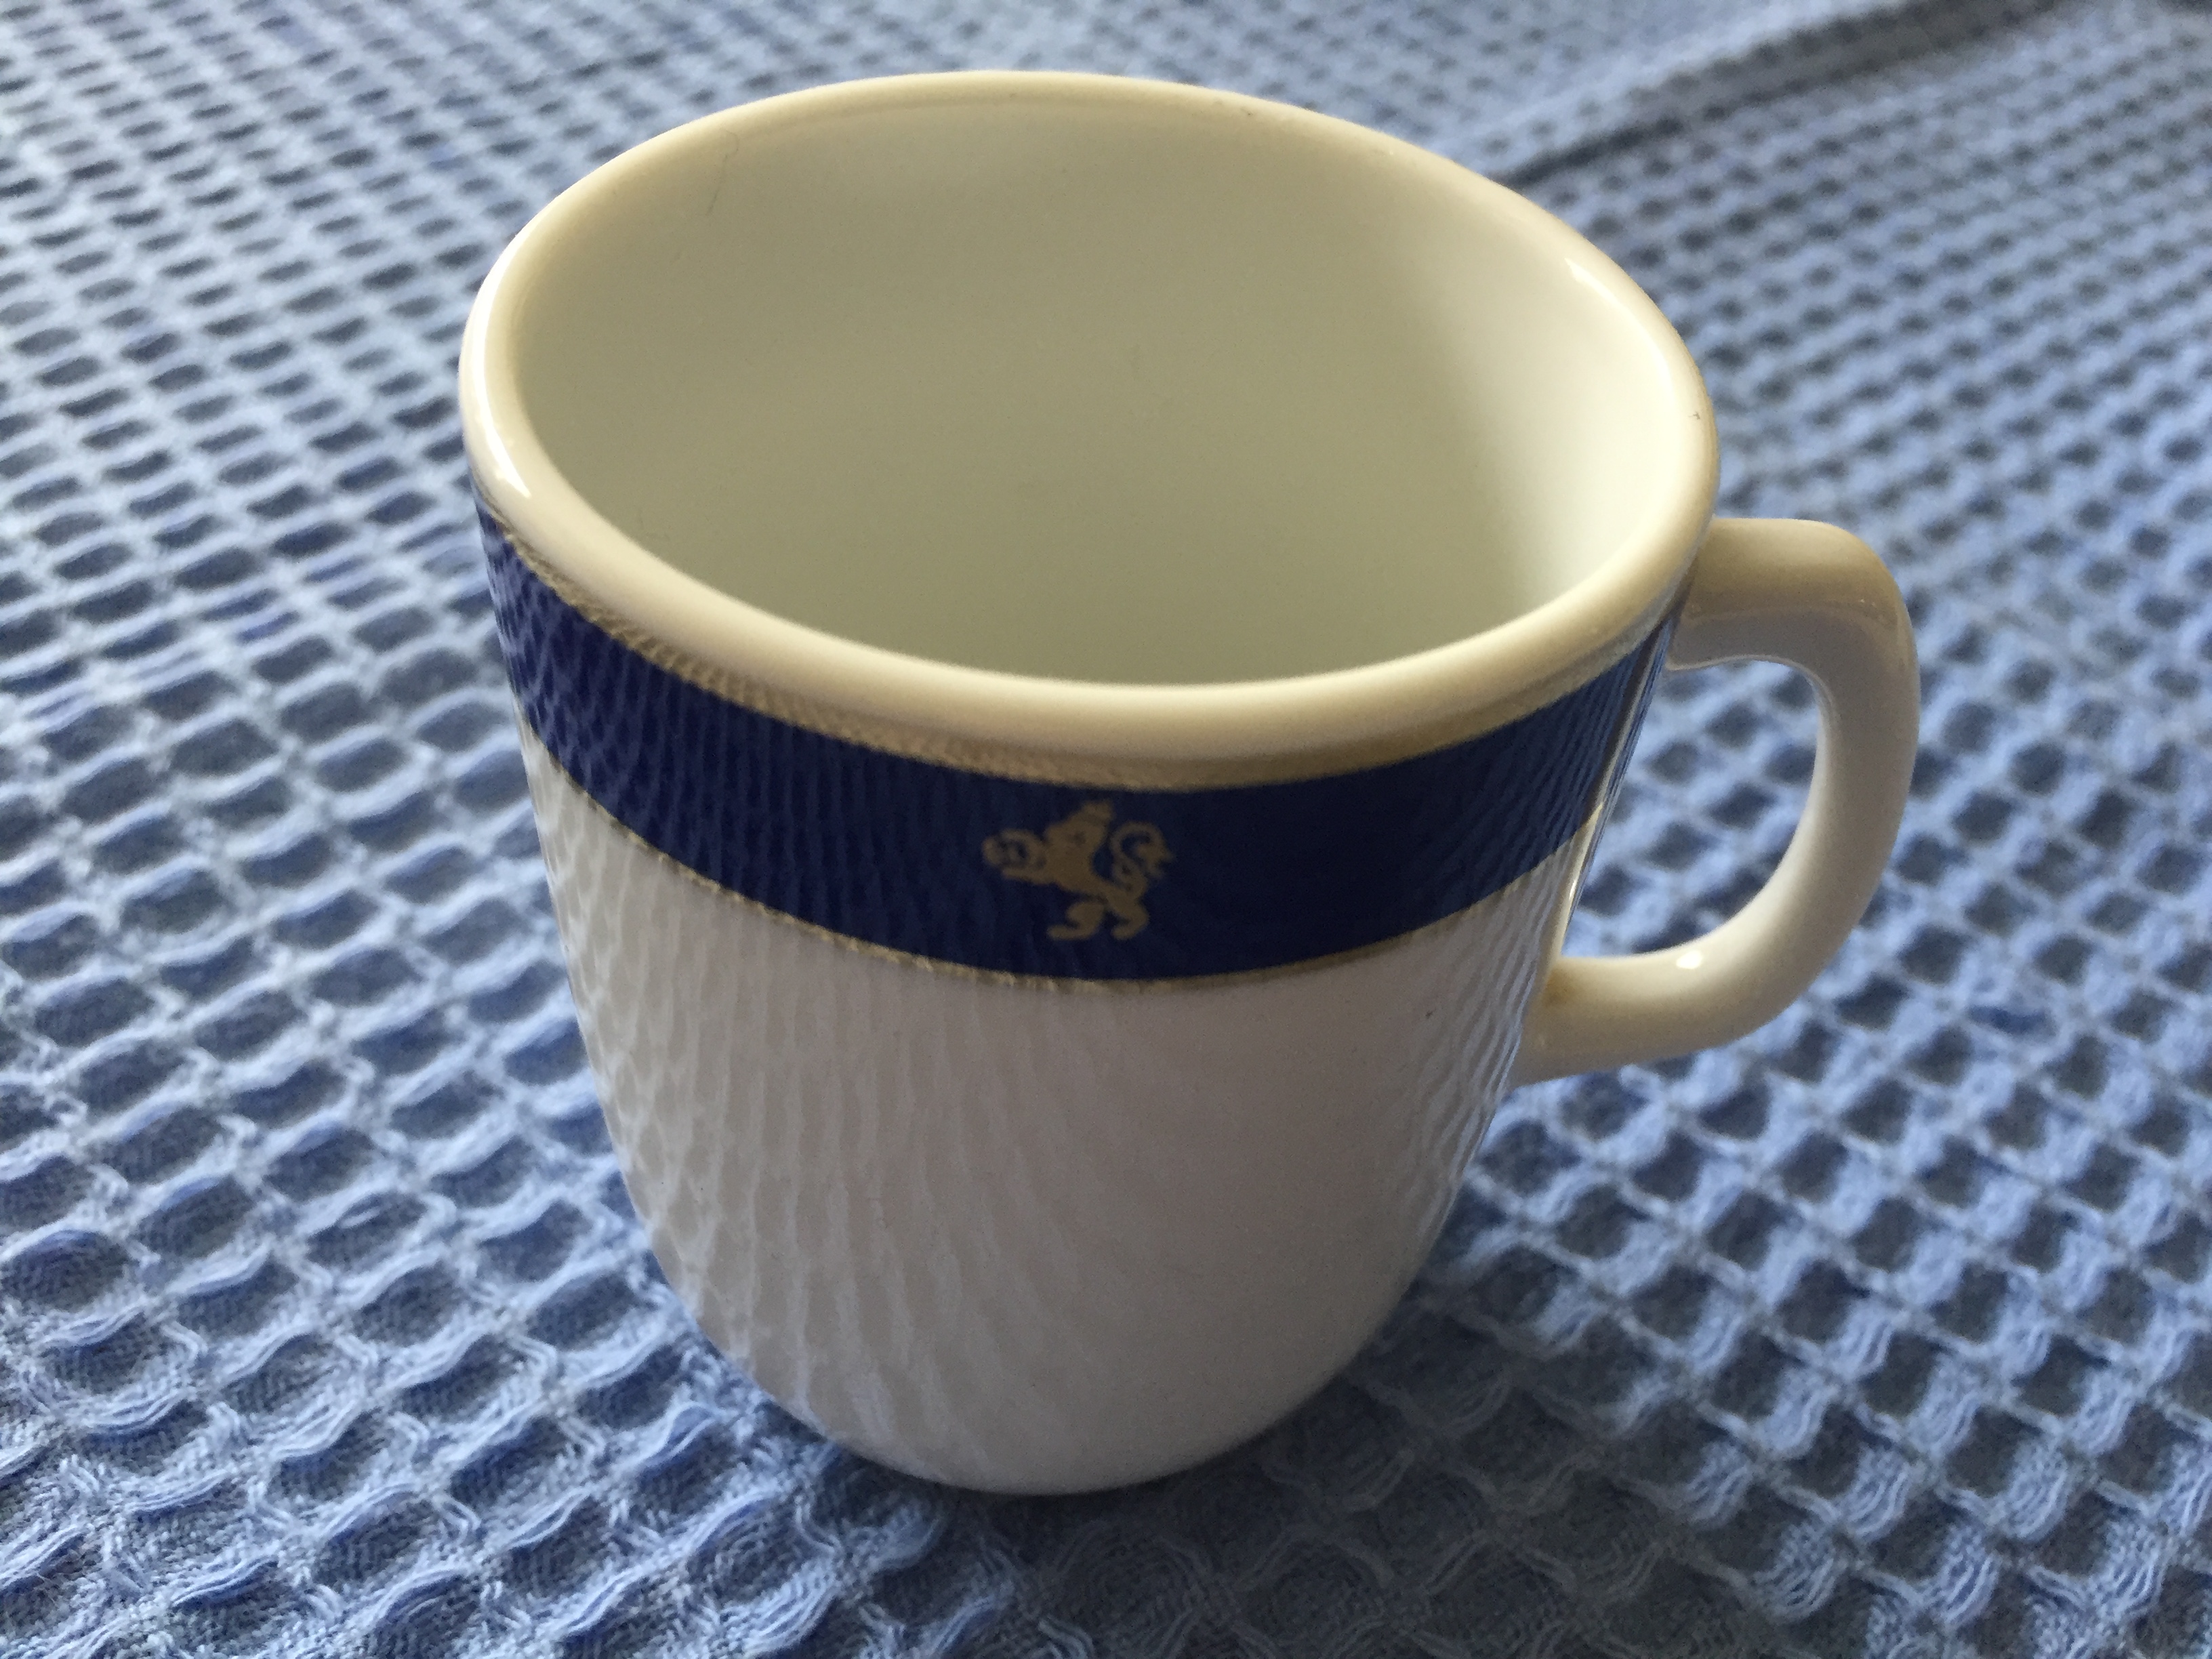 VERY OLD STYLE COFFEE CUP FROM THE CUNARD LINE SHIPPING COMPANY